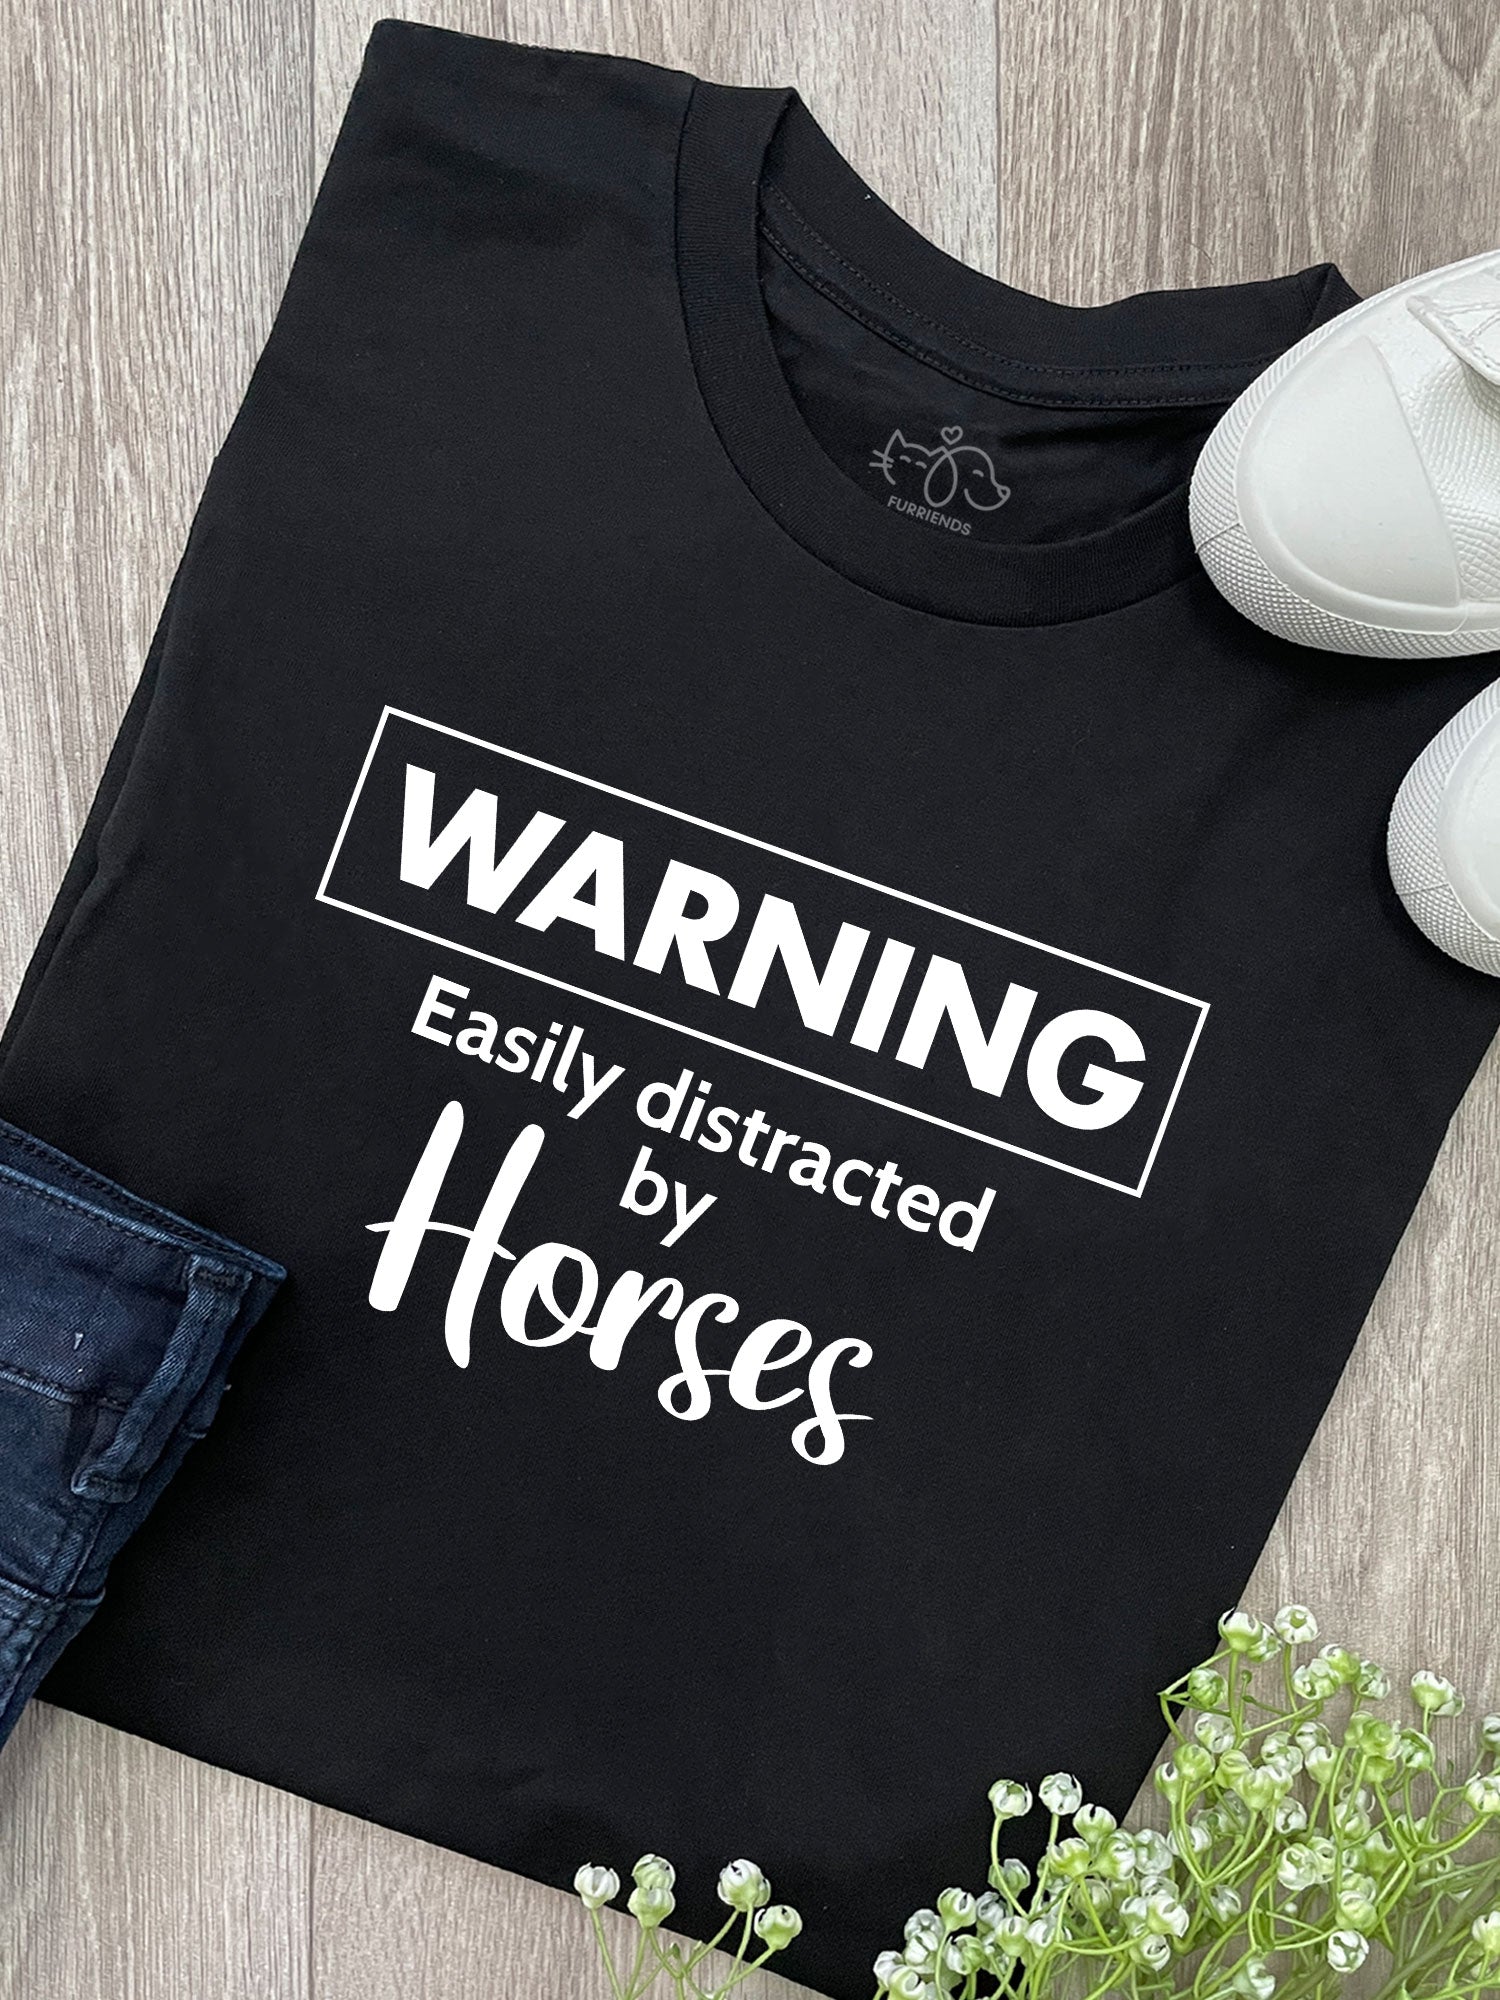 Warning! Easily Distracted By Horses Script